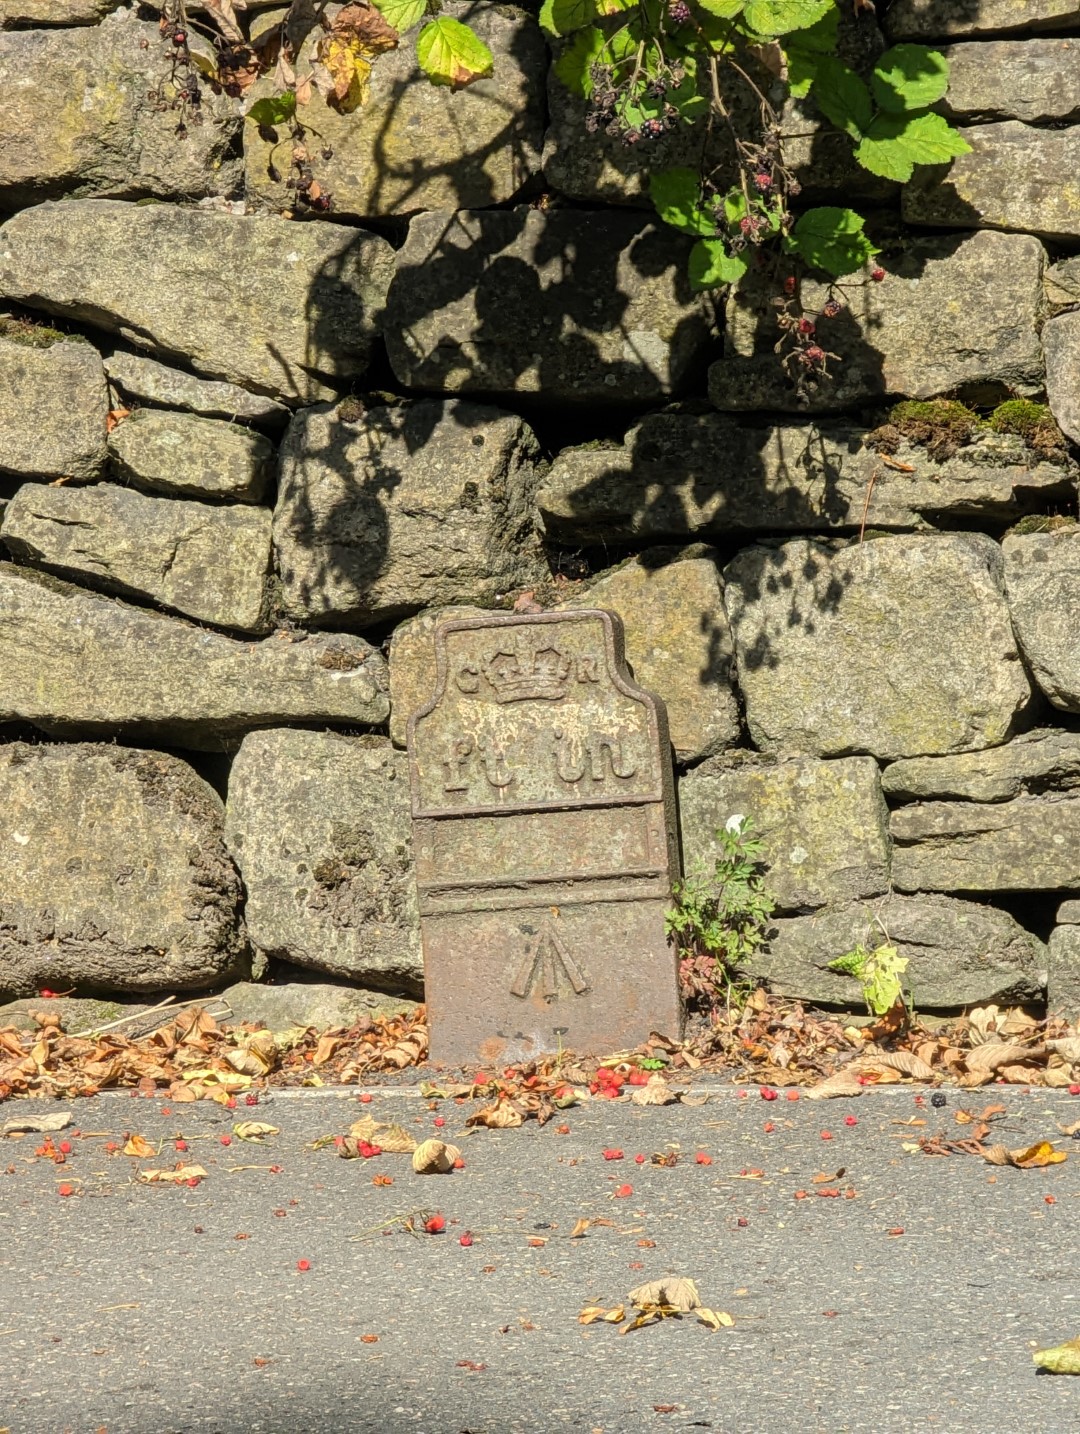 Telegraph cable marker post at Dan Bank, Stockport Road, Marple, Cheshire by Andrew Robertson 